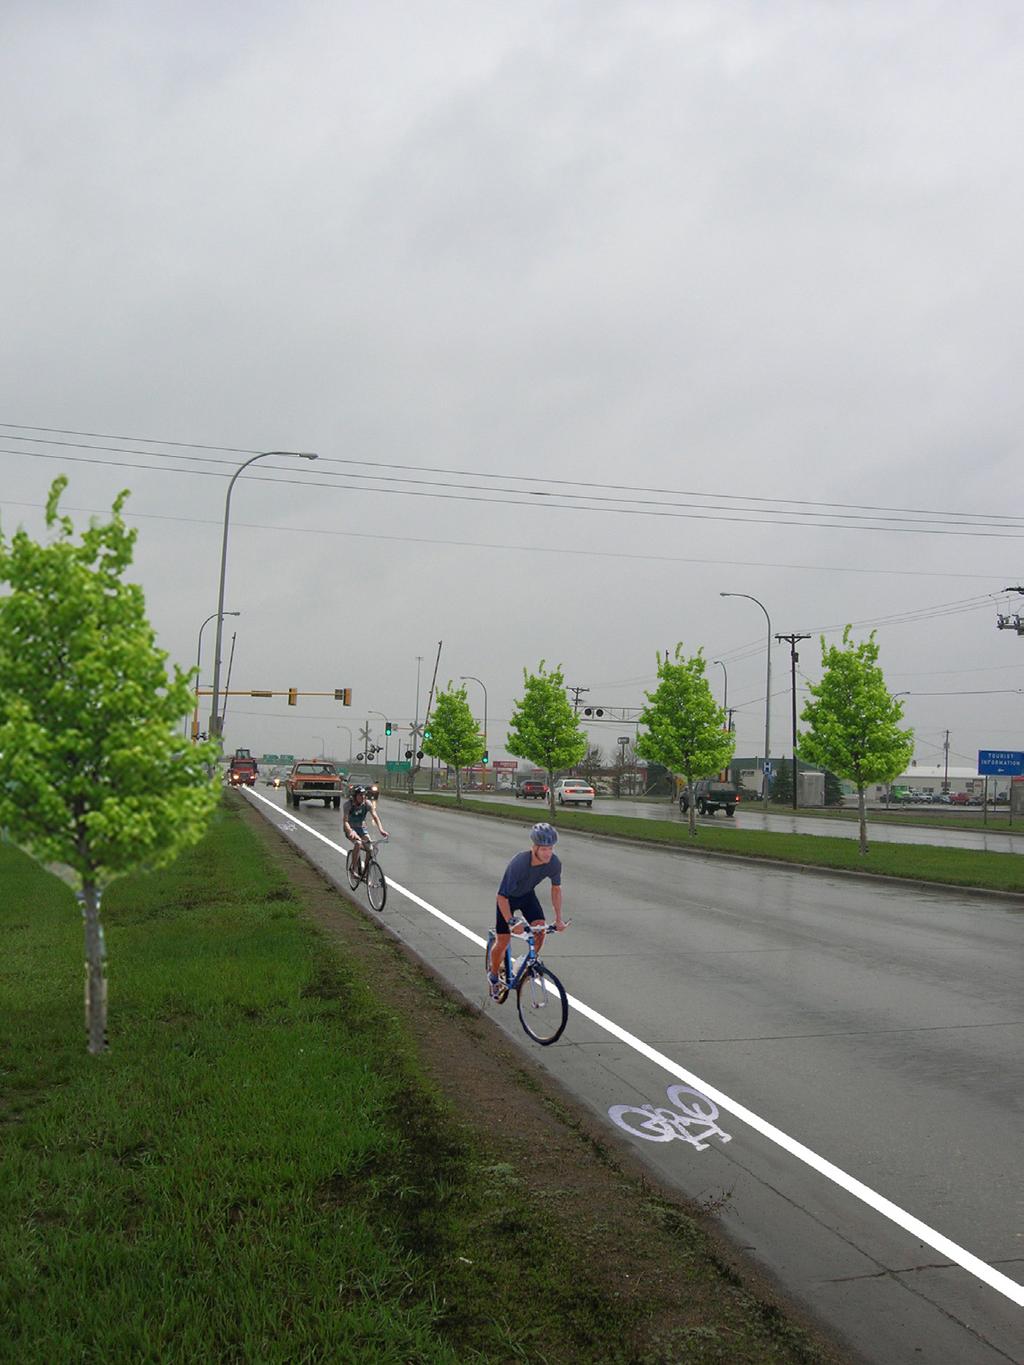 Include biking lanes on the roads to minimize sidewalk traffic and give bikers their own route to follow while